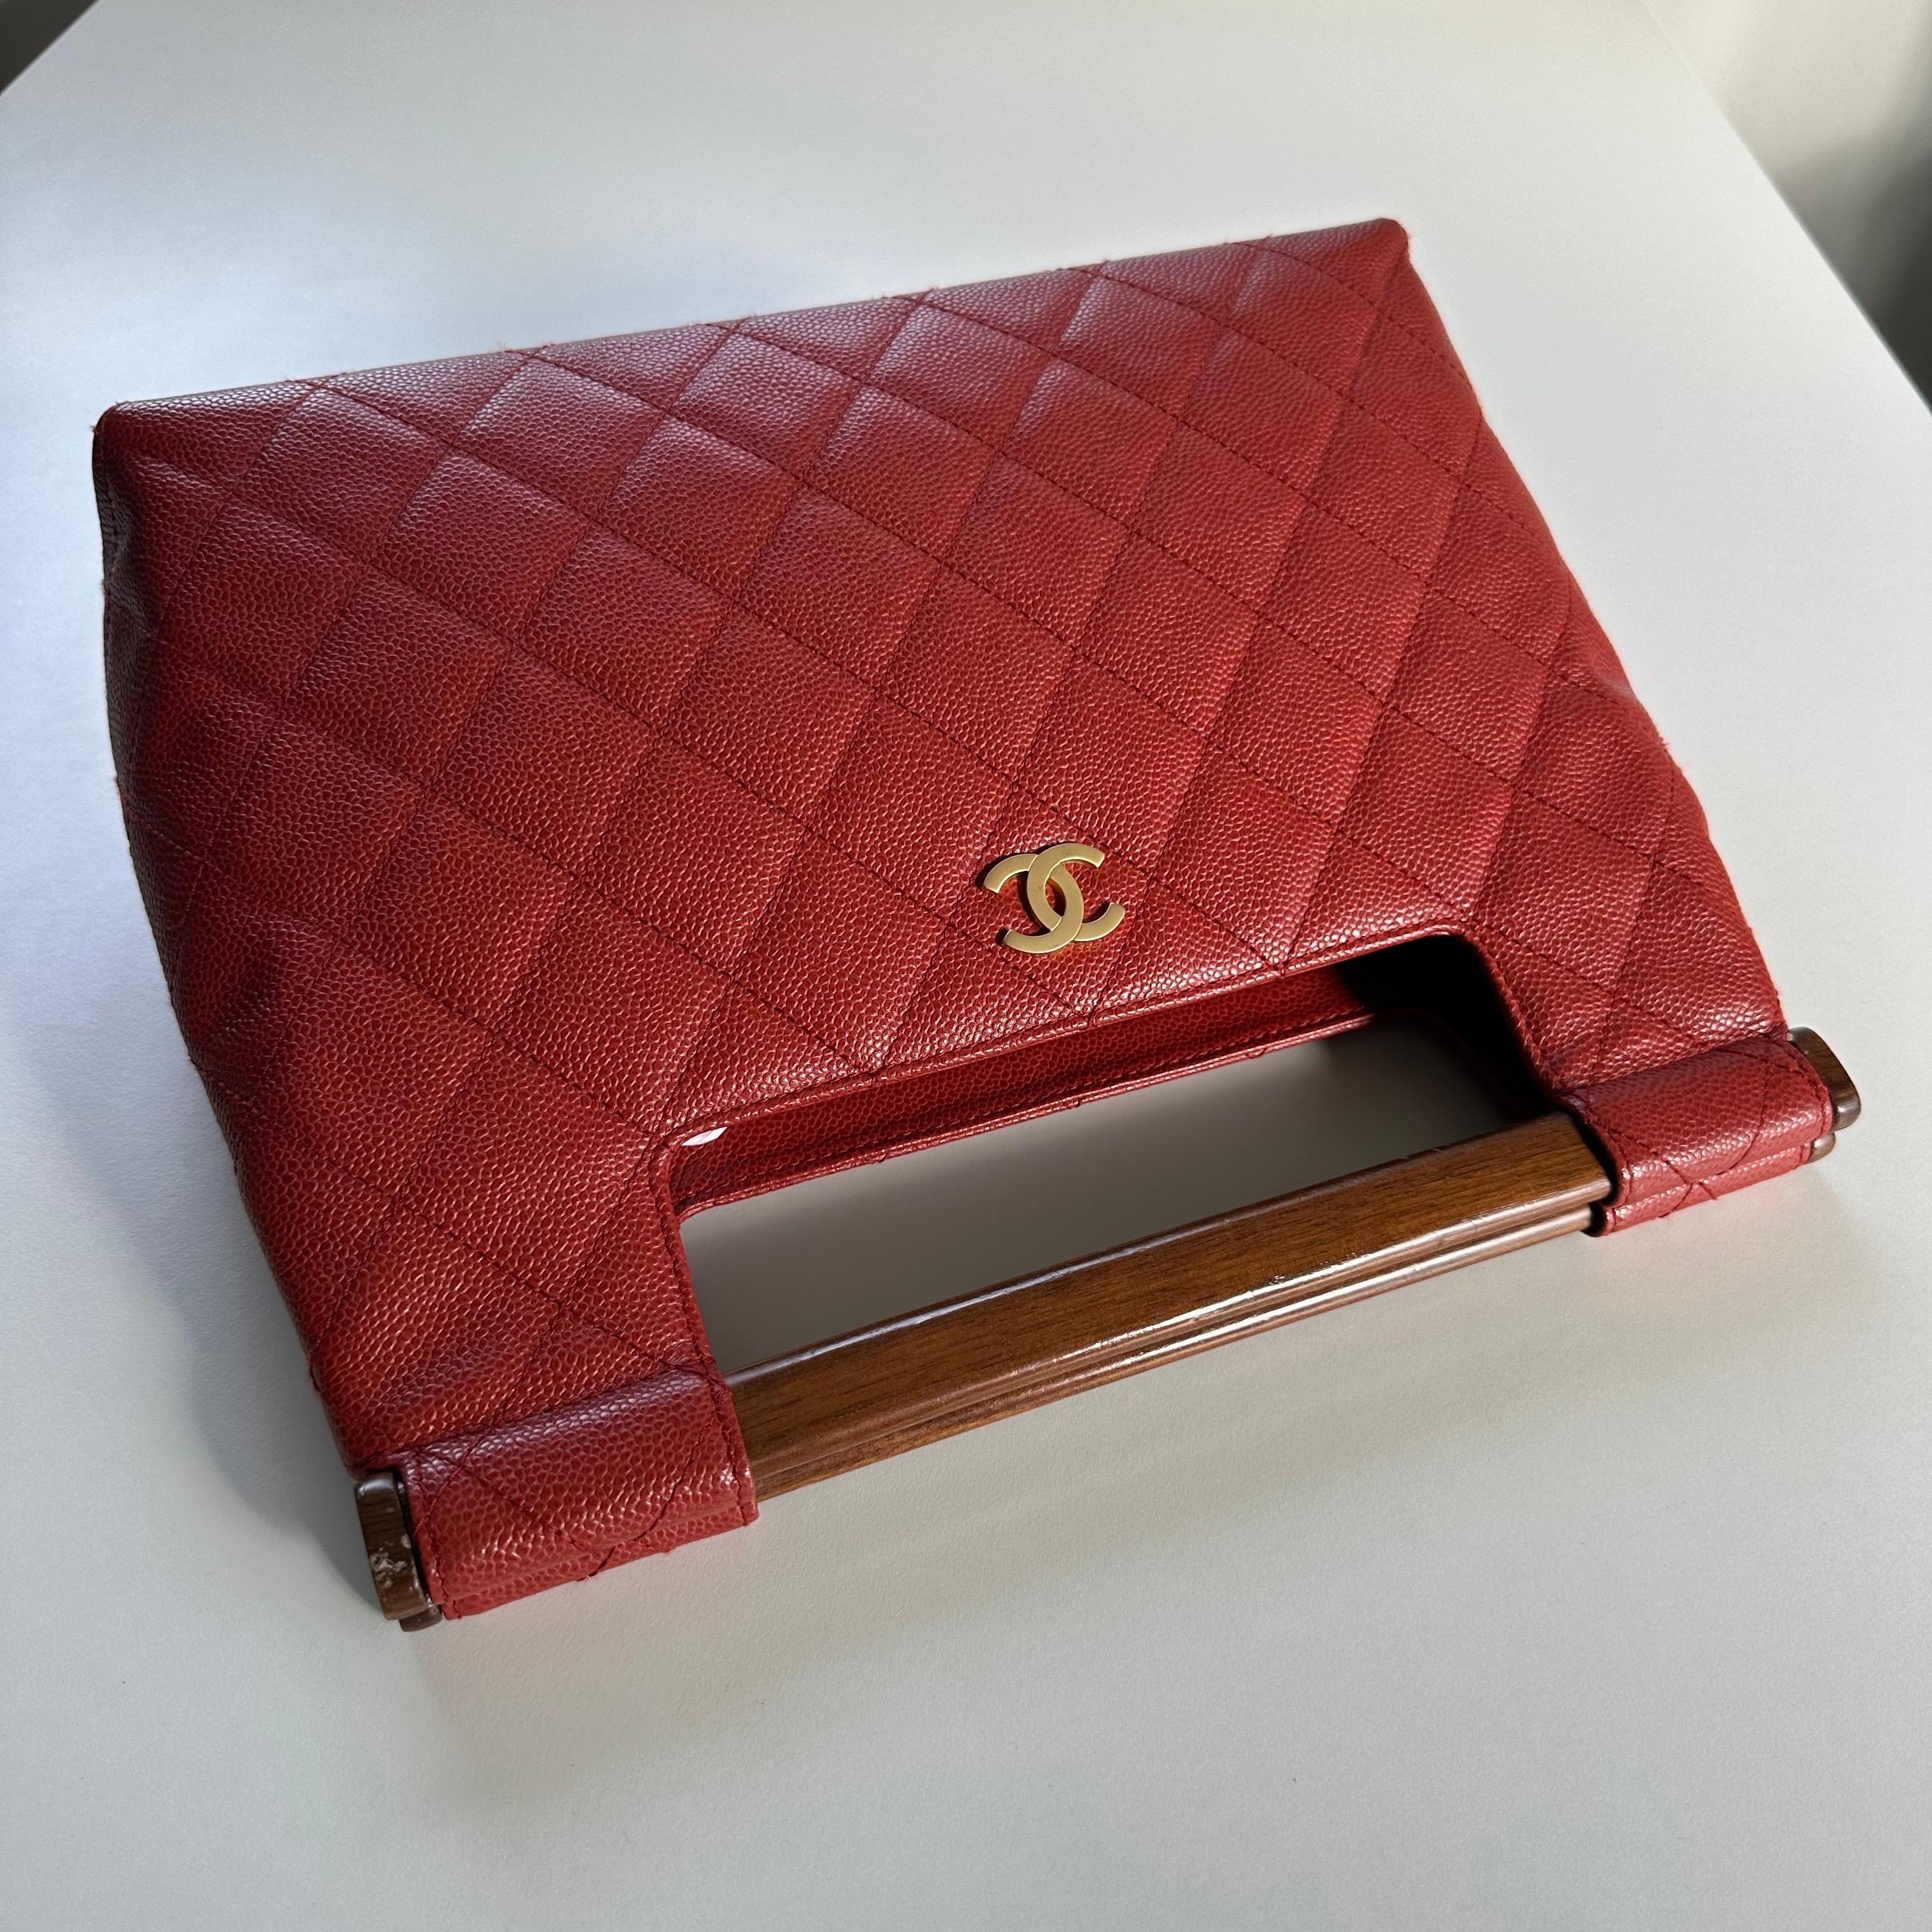 Chanel 2003 Wood Top Handle Rare Red Caviar Jumbo Kelly Envelope Clutch Tote Bag For Sale 3